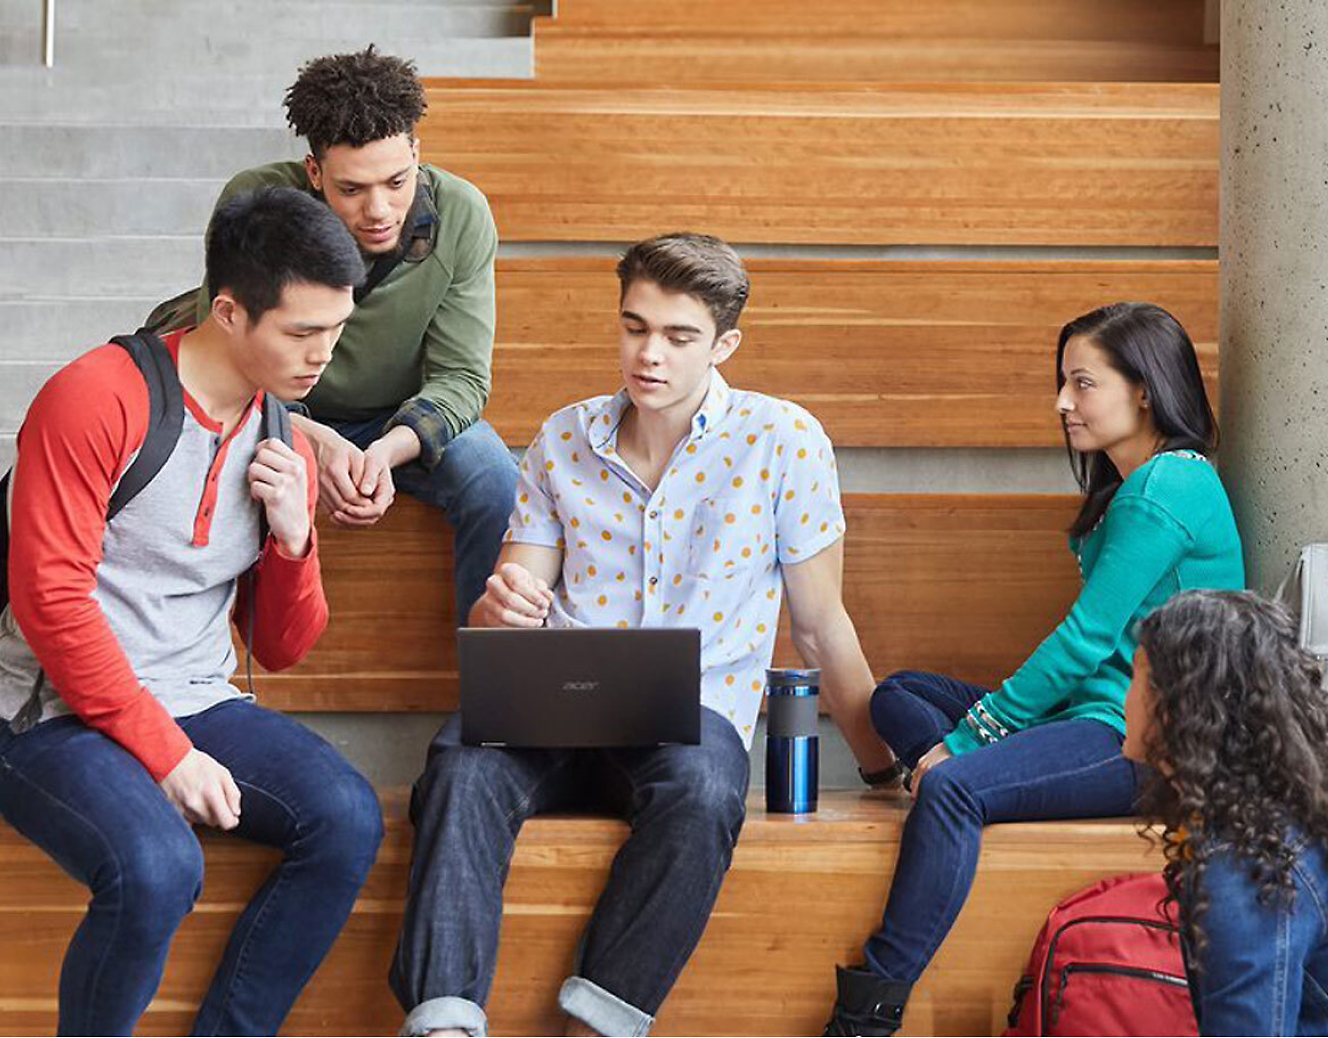 A group of students sitting on a wooden bench with a laptop.